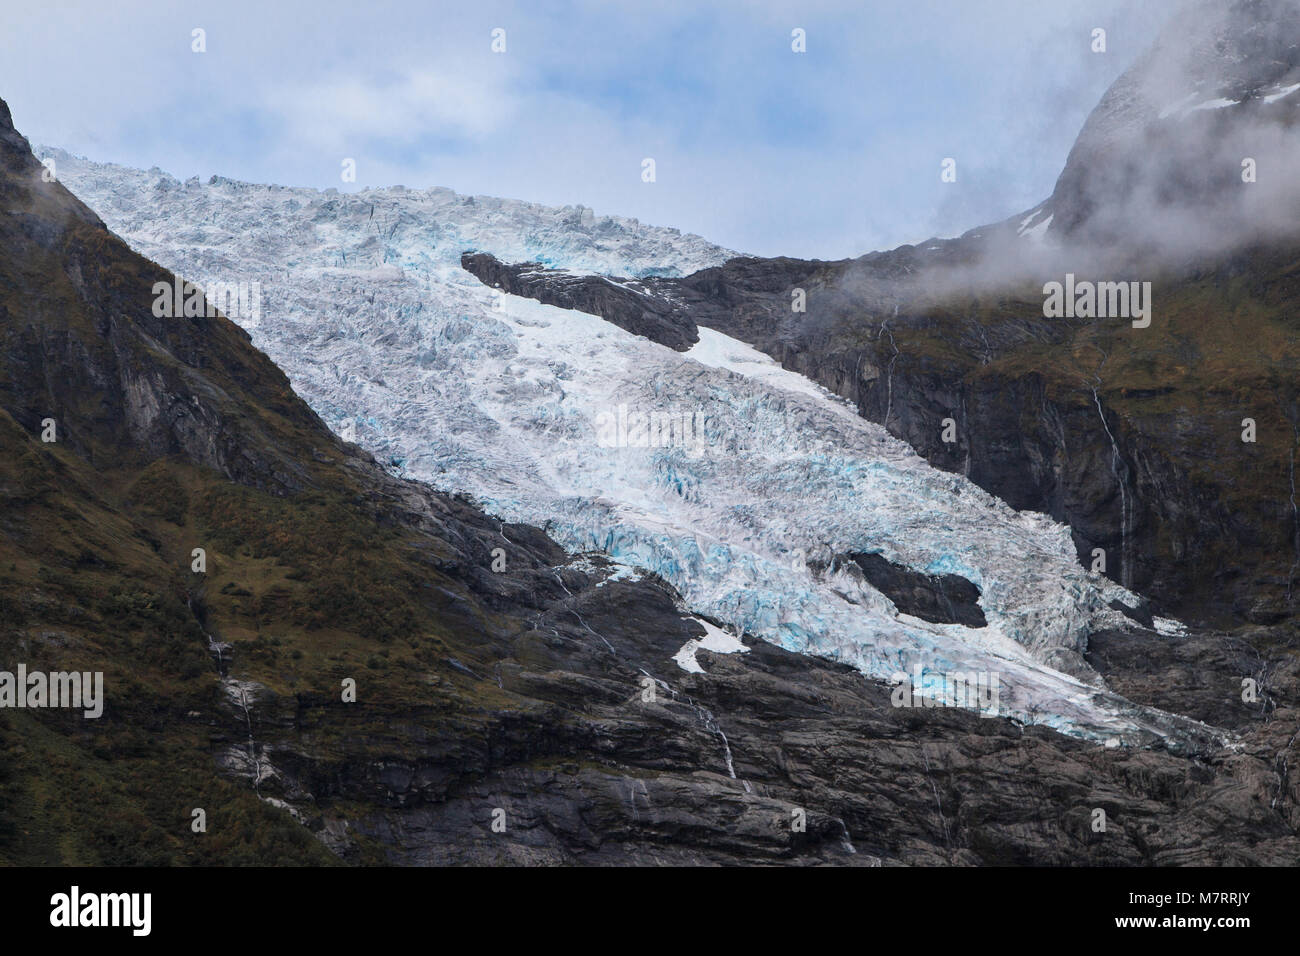 Boyabreen Glacier in the Jostedalsbreen National Park, Norway. Stock Photo